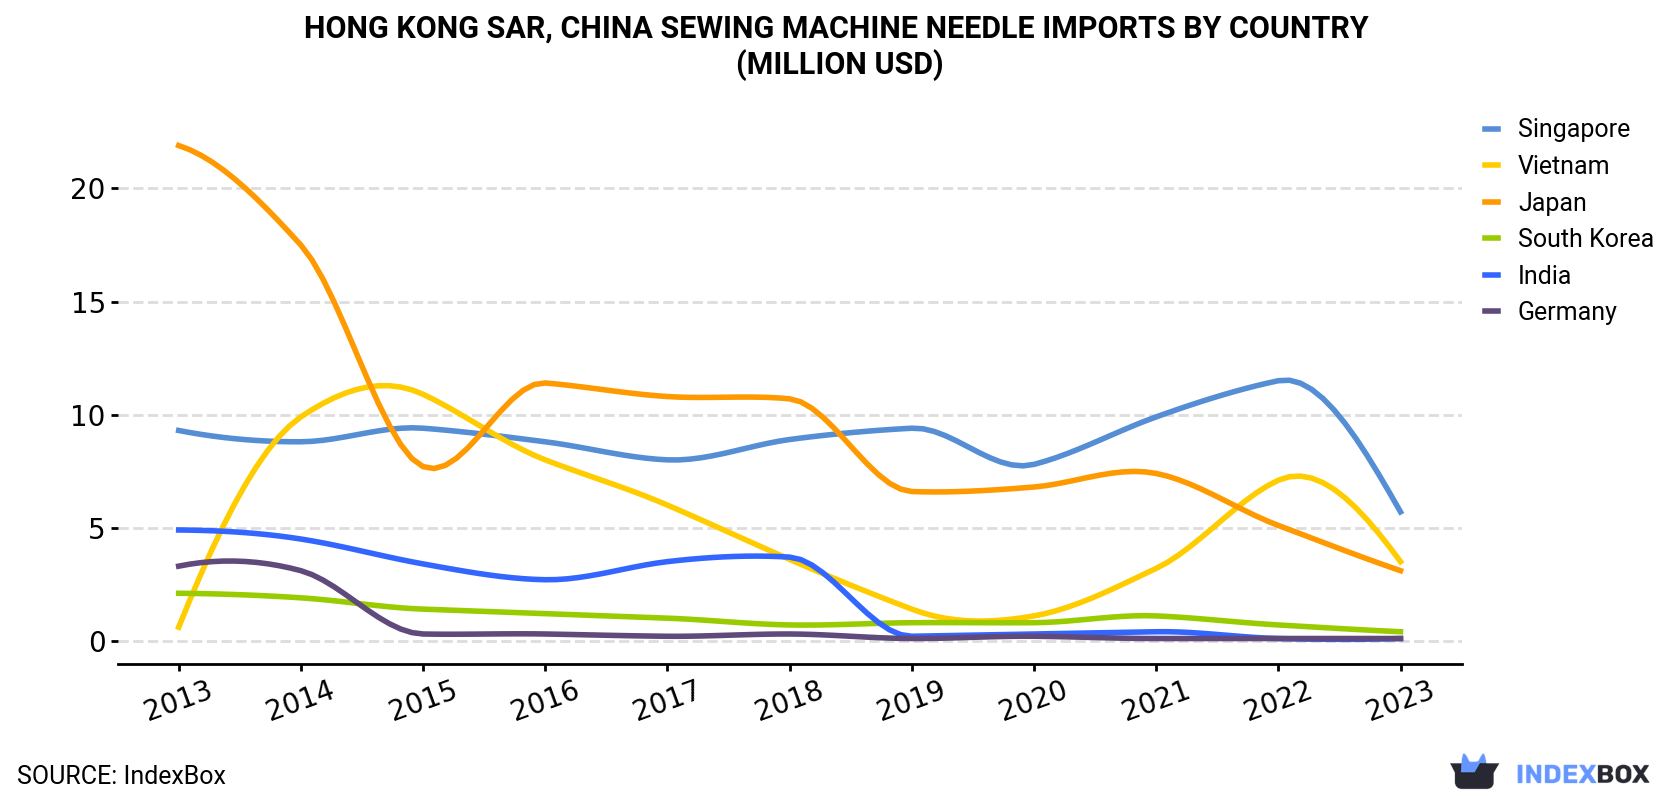 Hong Kong Sewing Machine Needle Imports By Country (Million USD)